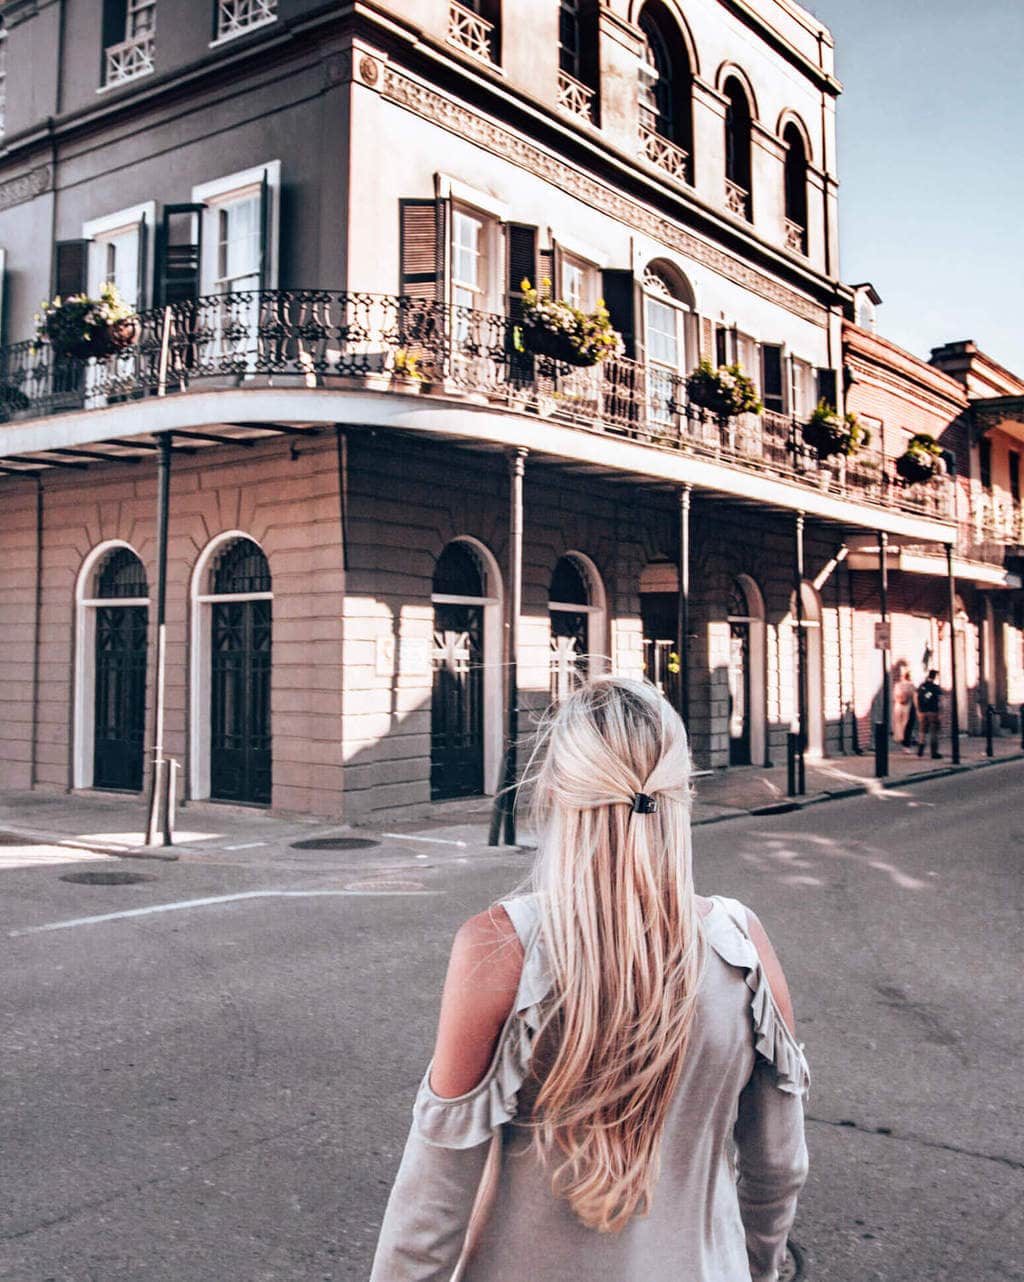 Architecture in the French Quarter in New Orleans